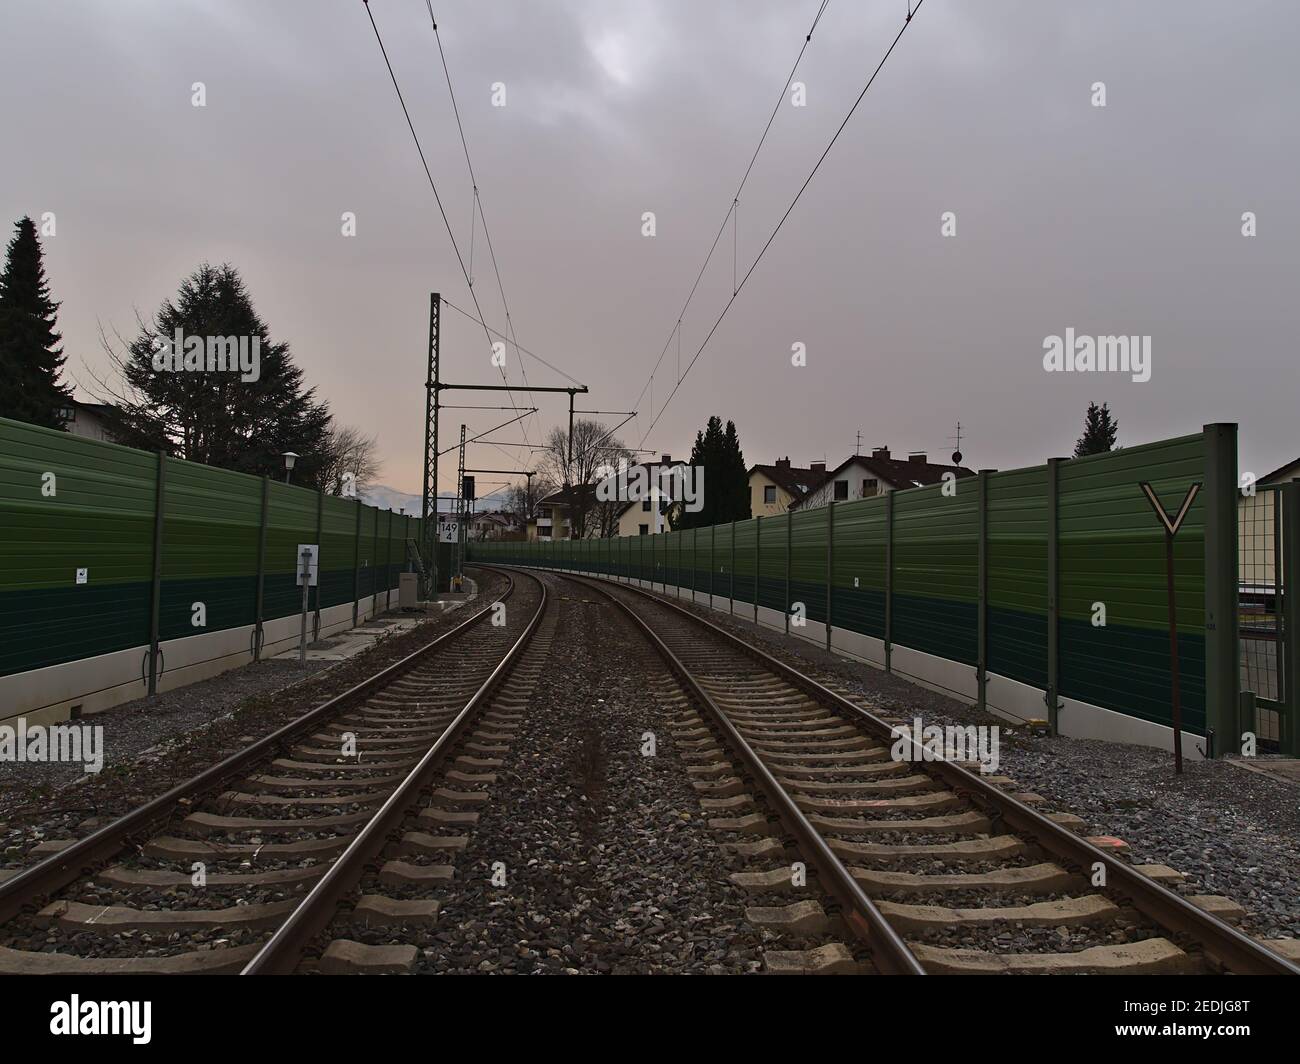 Two-lane railroad tracks with overhead cable and green colored noise protection barrier in a village on cloudy winter day with diminishing perspective. Stock Photo